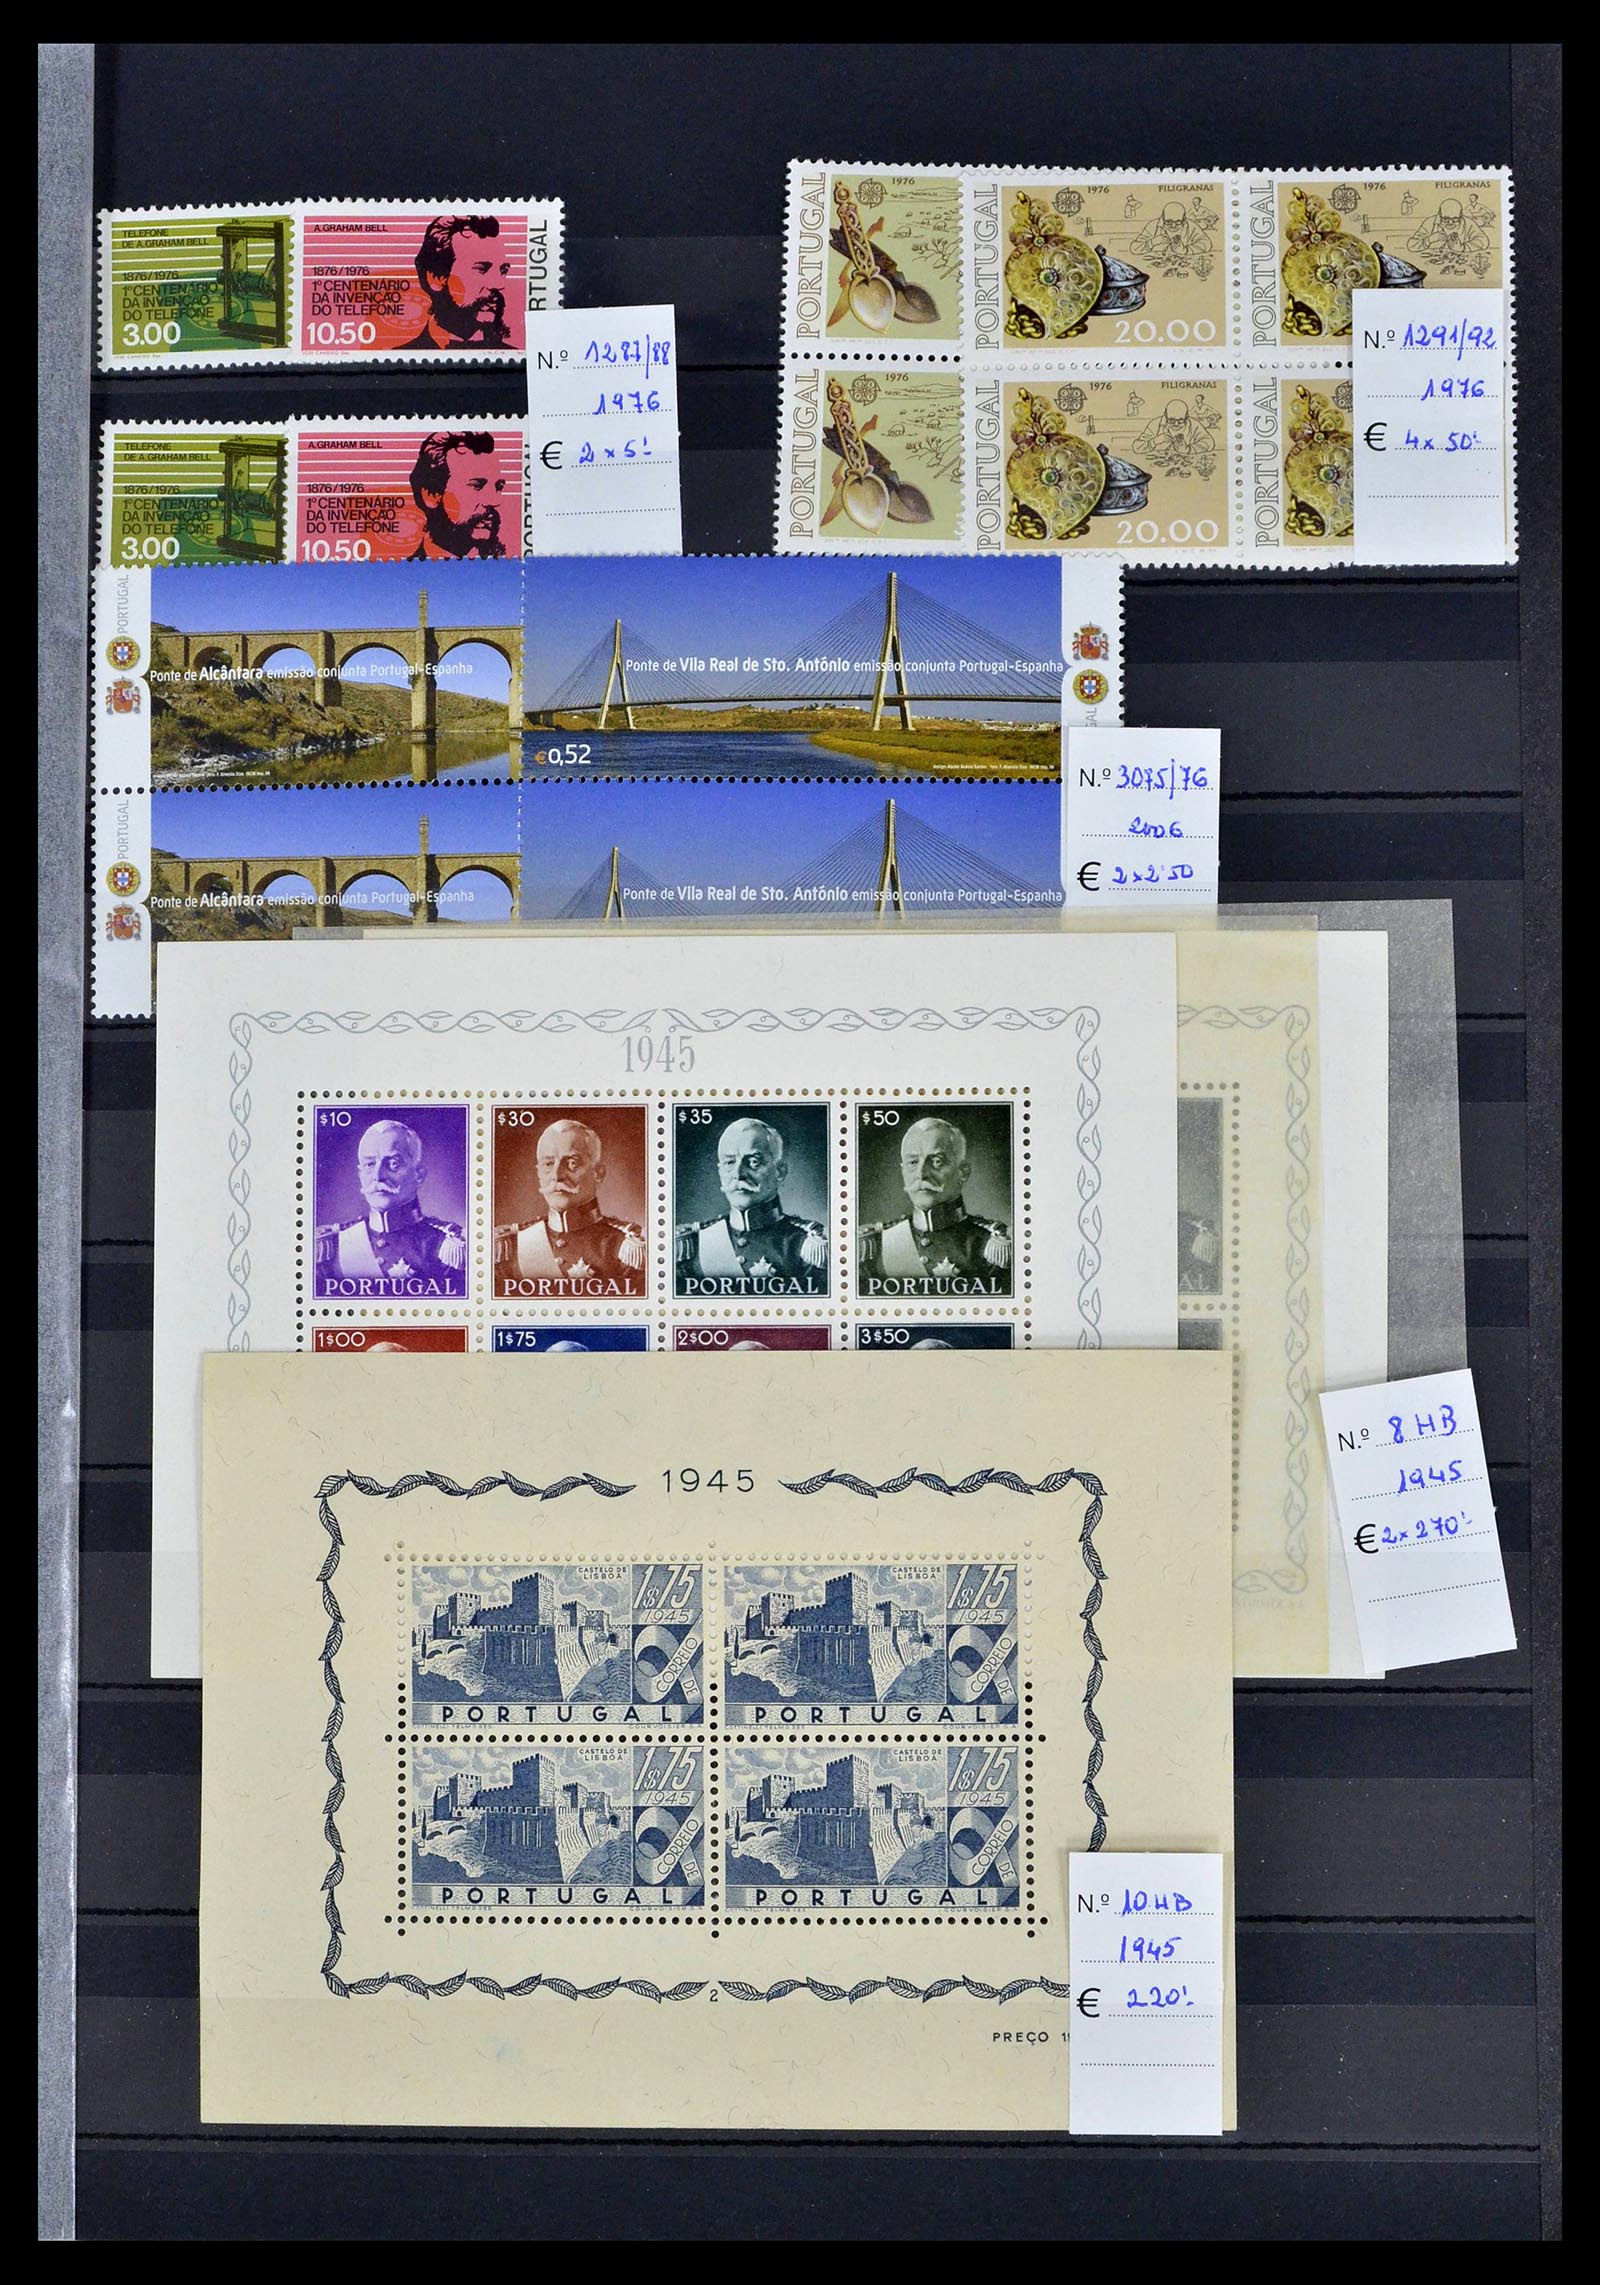 39236 0012 - Stamp collection 39236 European countries 40s-60s.